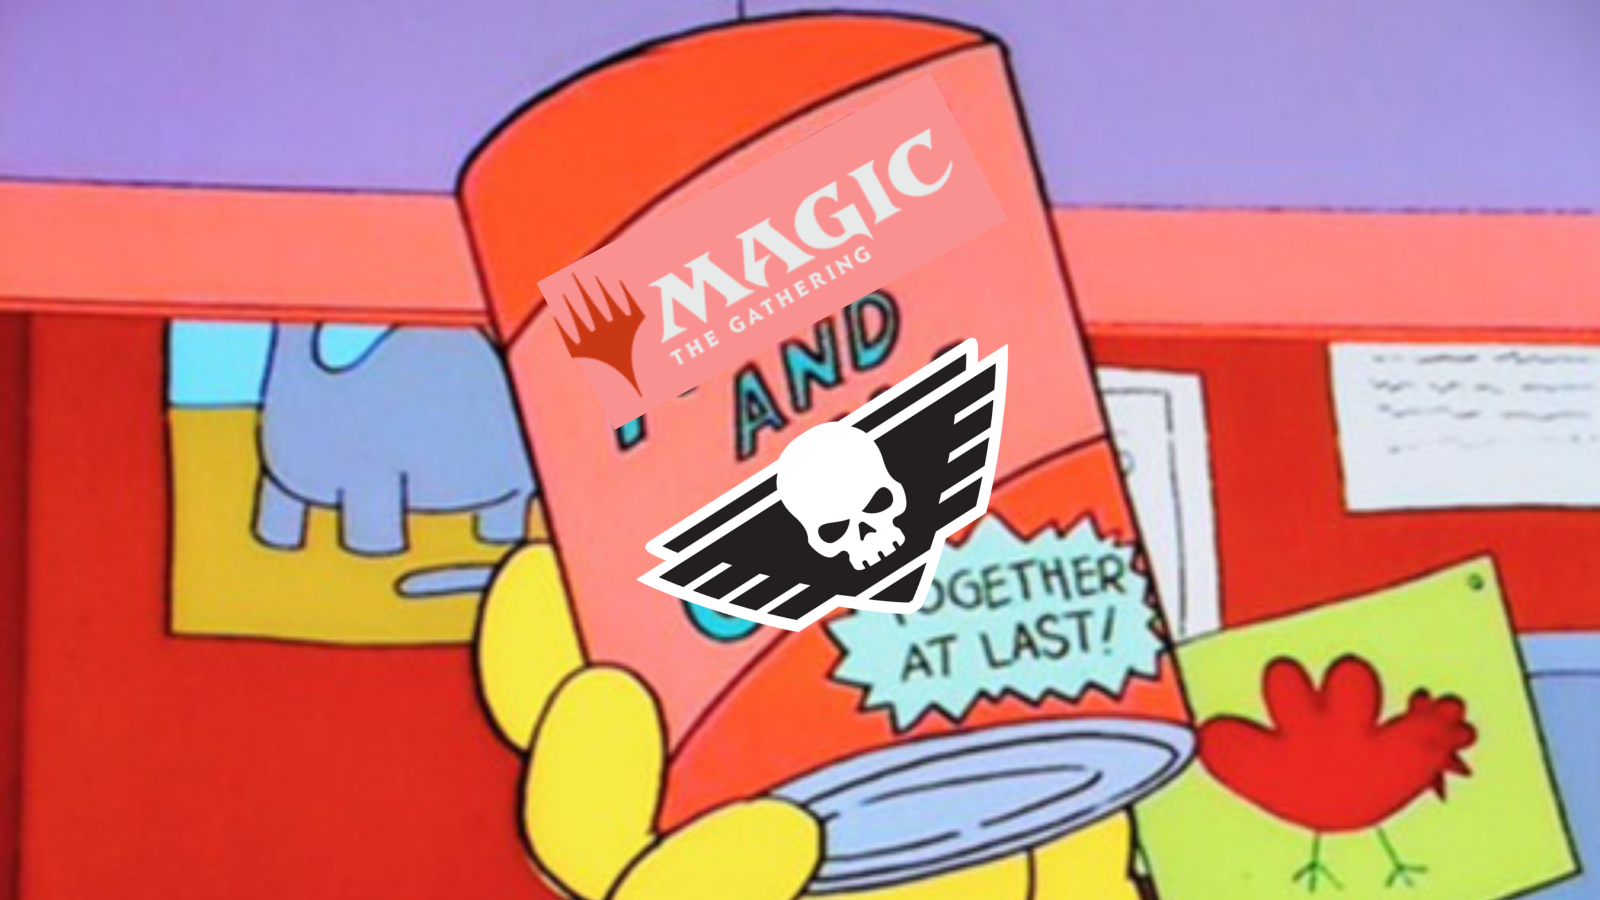 An image of The Simpson's meme where homer holds a can of nuts and gum, claiming "Together at last!" but with Magic the Gathering and Warhammer logos